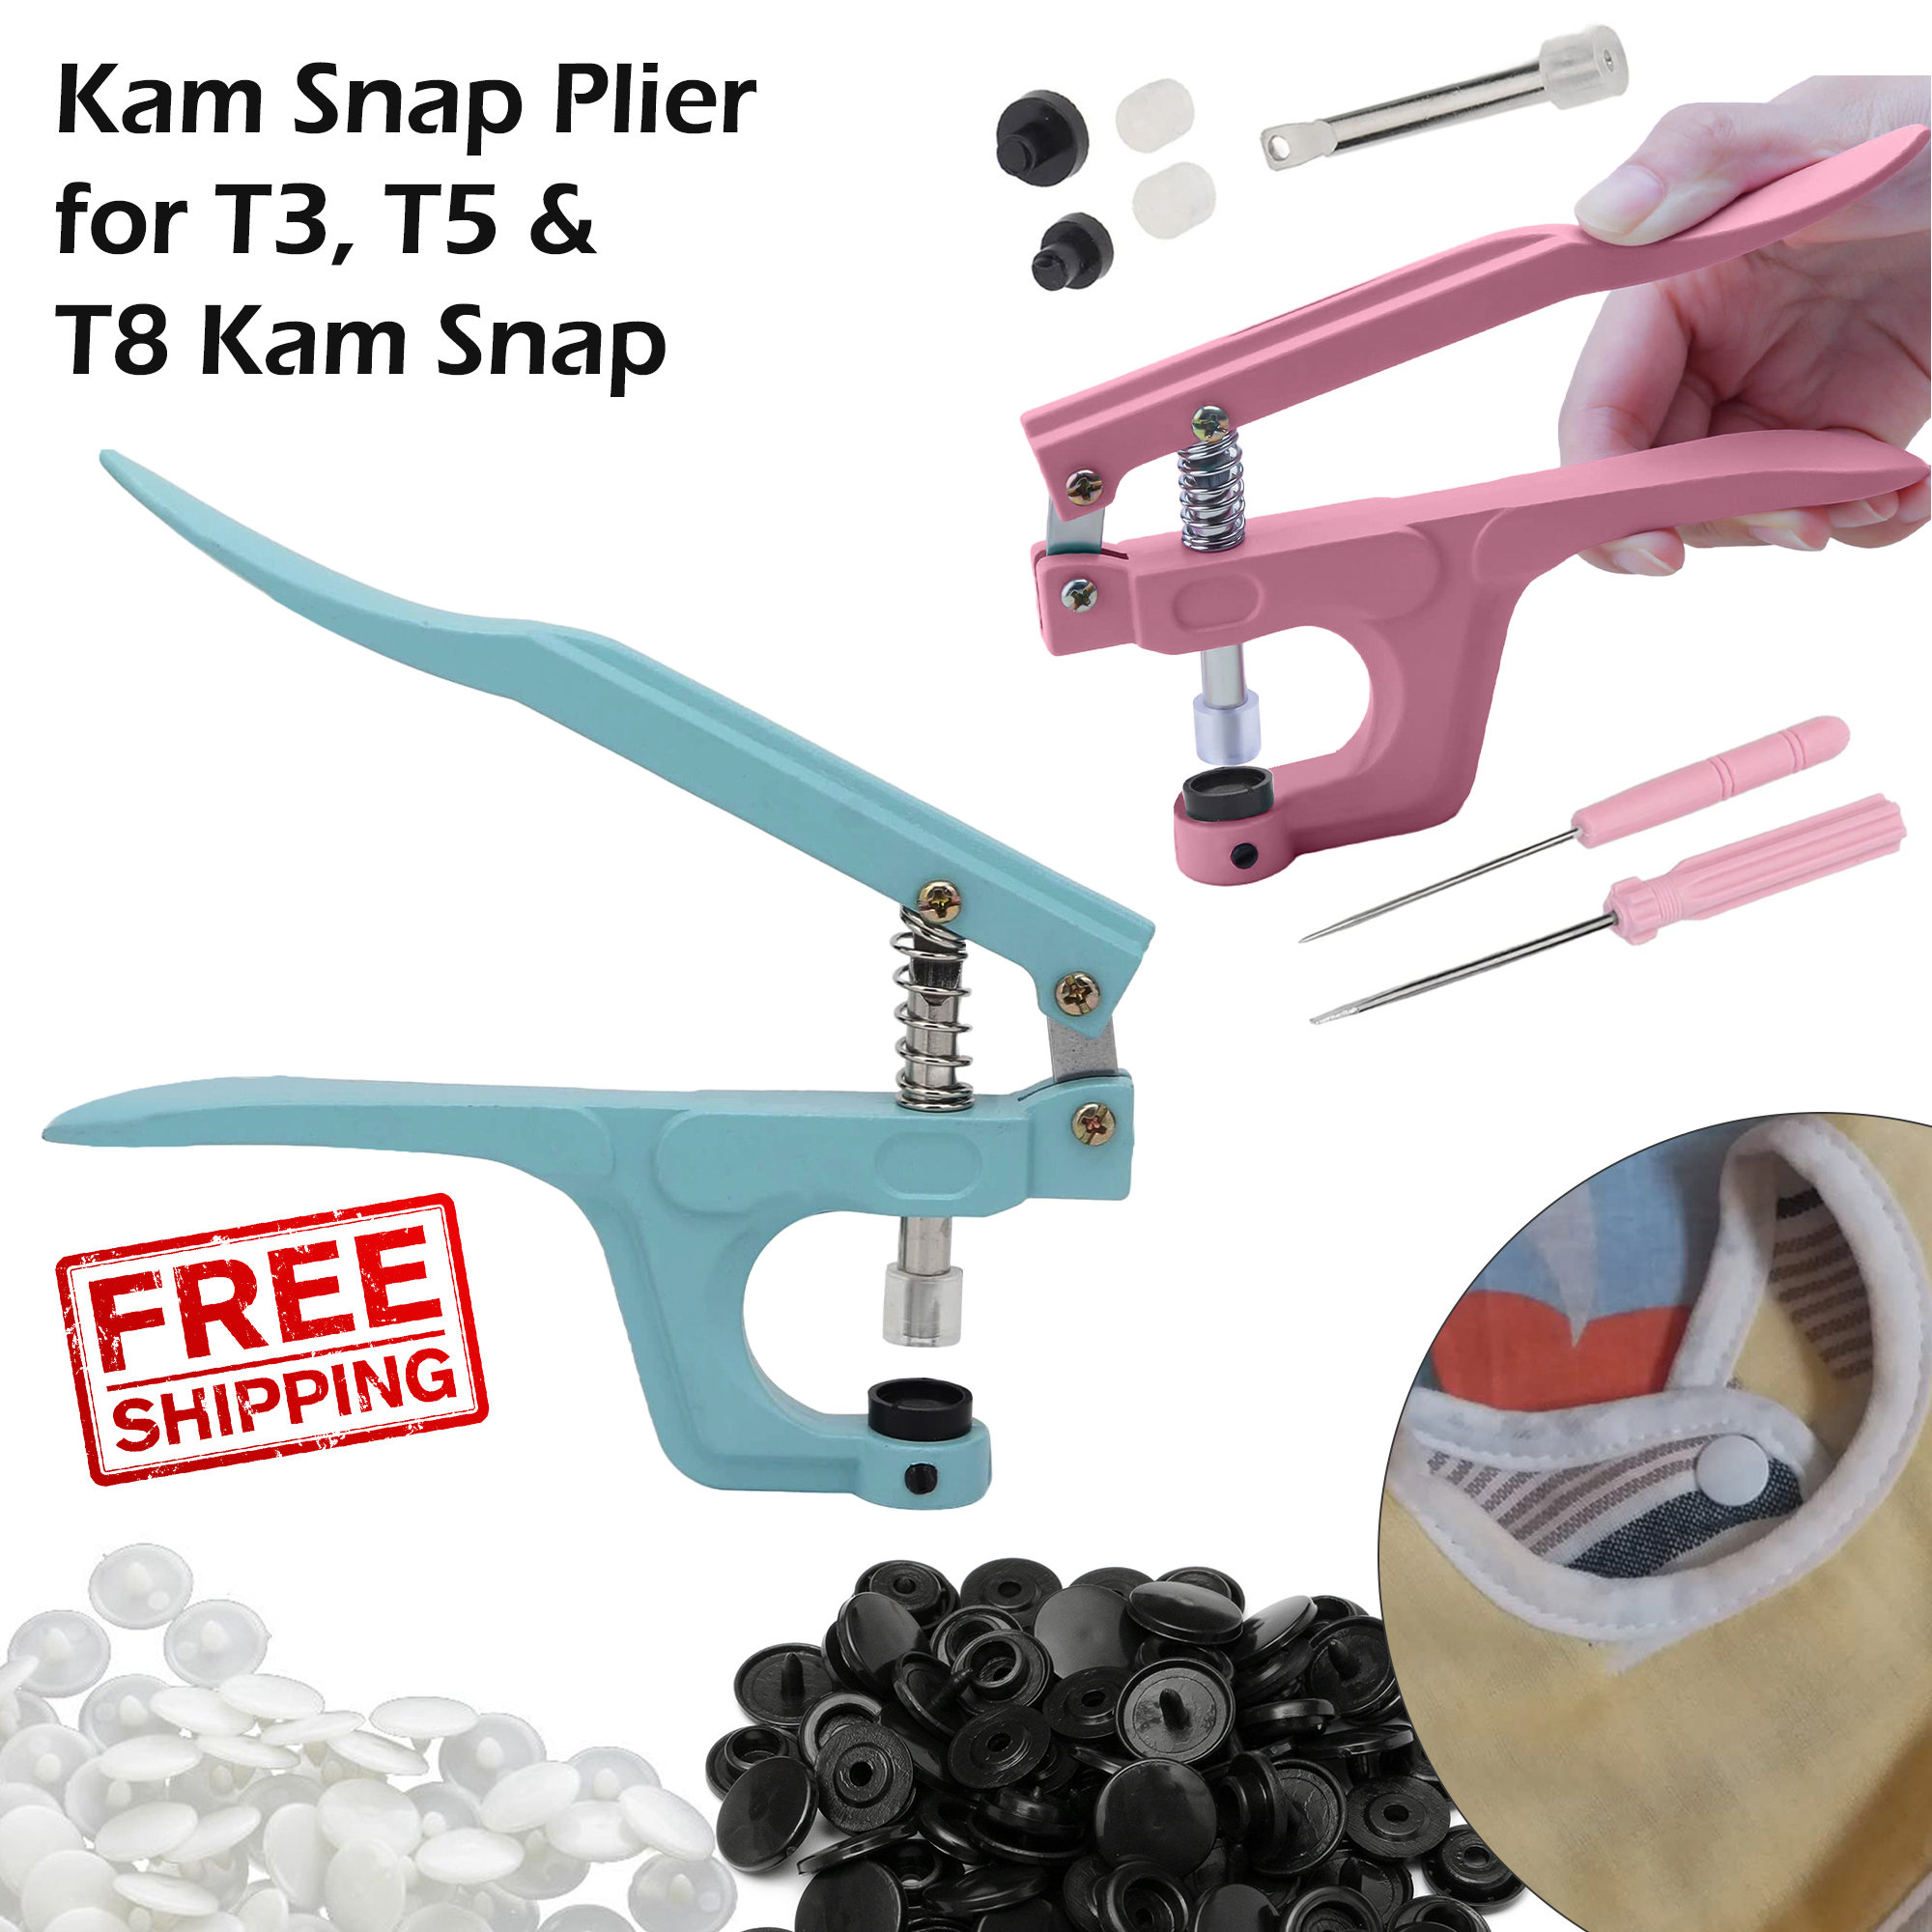 KAM Snaps Kit, Snap Button Tool for KAM and Metal Spring Fasteners, Mint  KAM Snap Plier Professional, Leather Spring Snap Tool, Snap Setter 